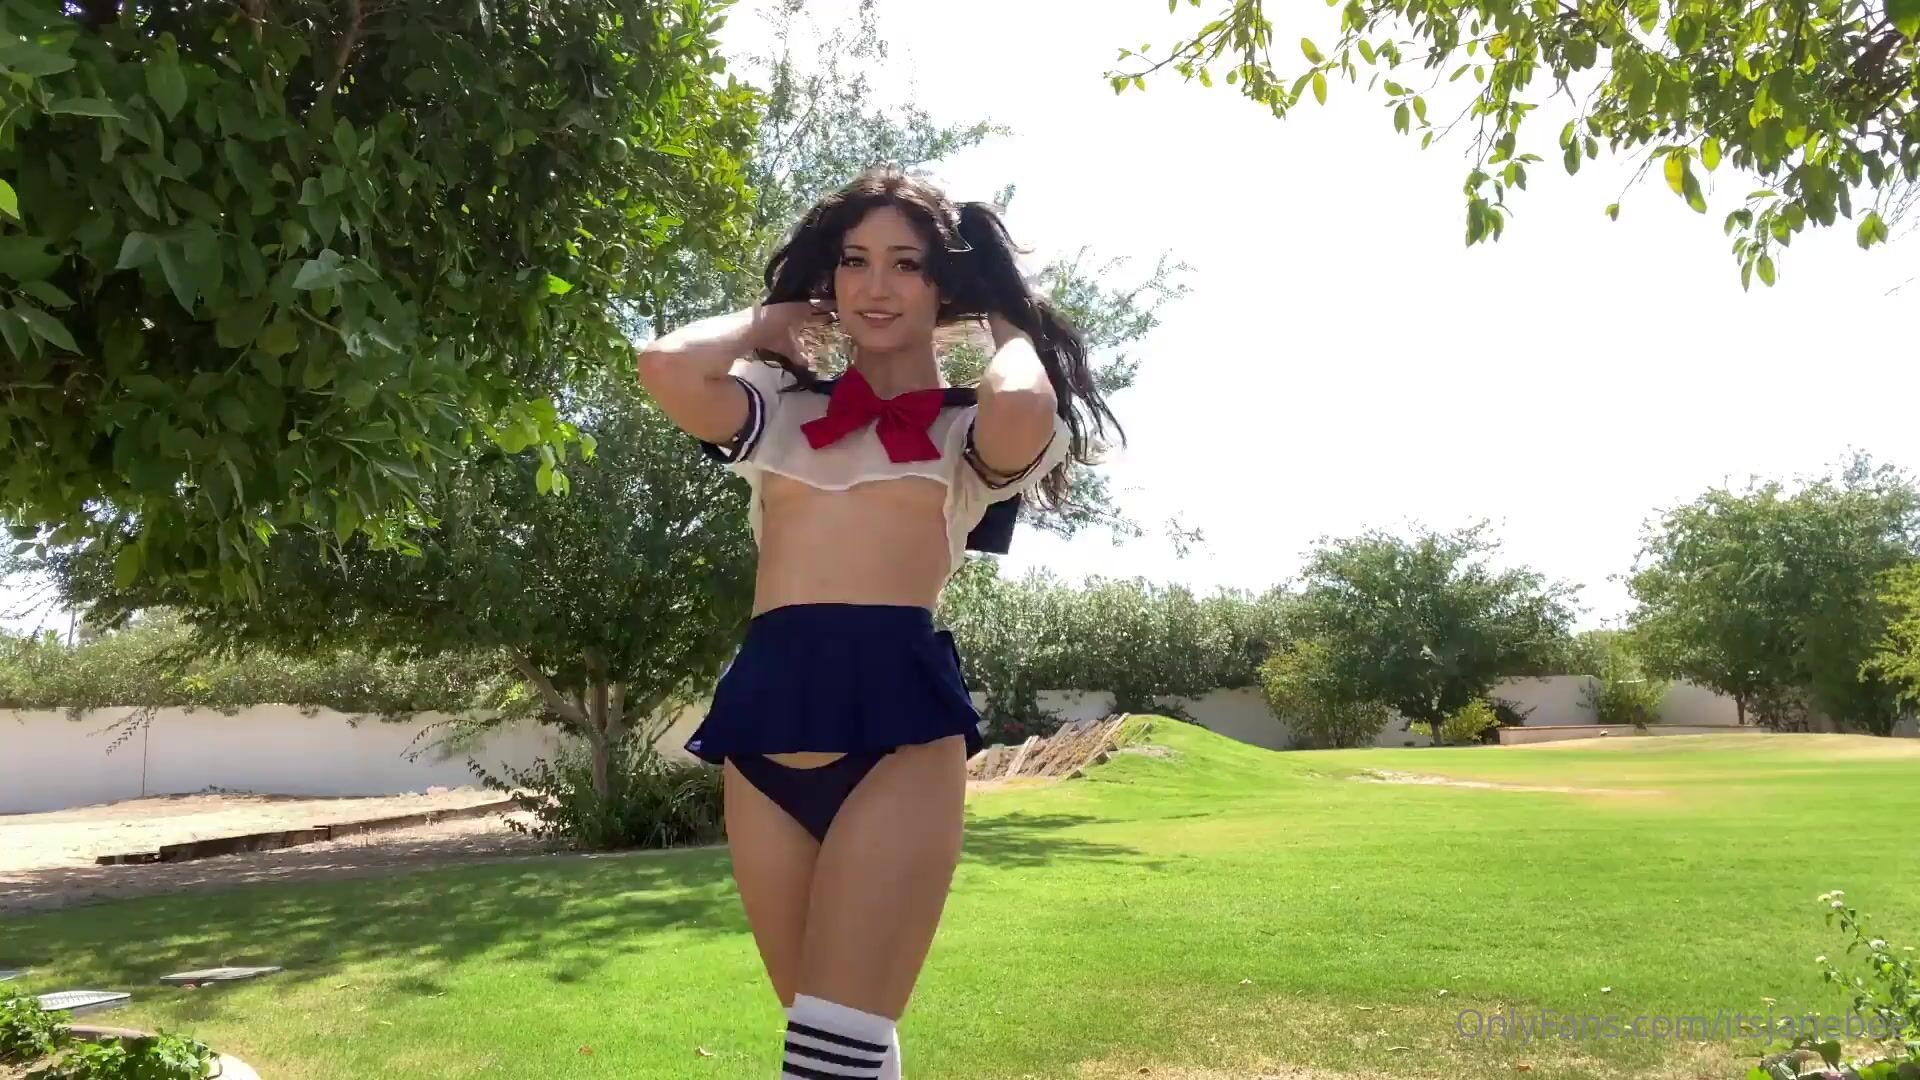 Girl Realxxx - Itsjanebee This Is The Full School Girl Tease Based Video I Lowered The  Goal After Editing